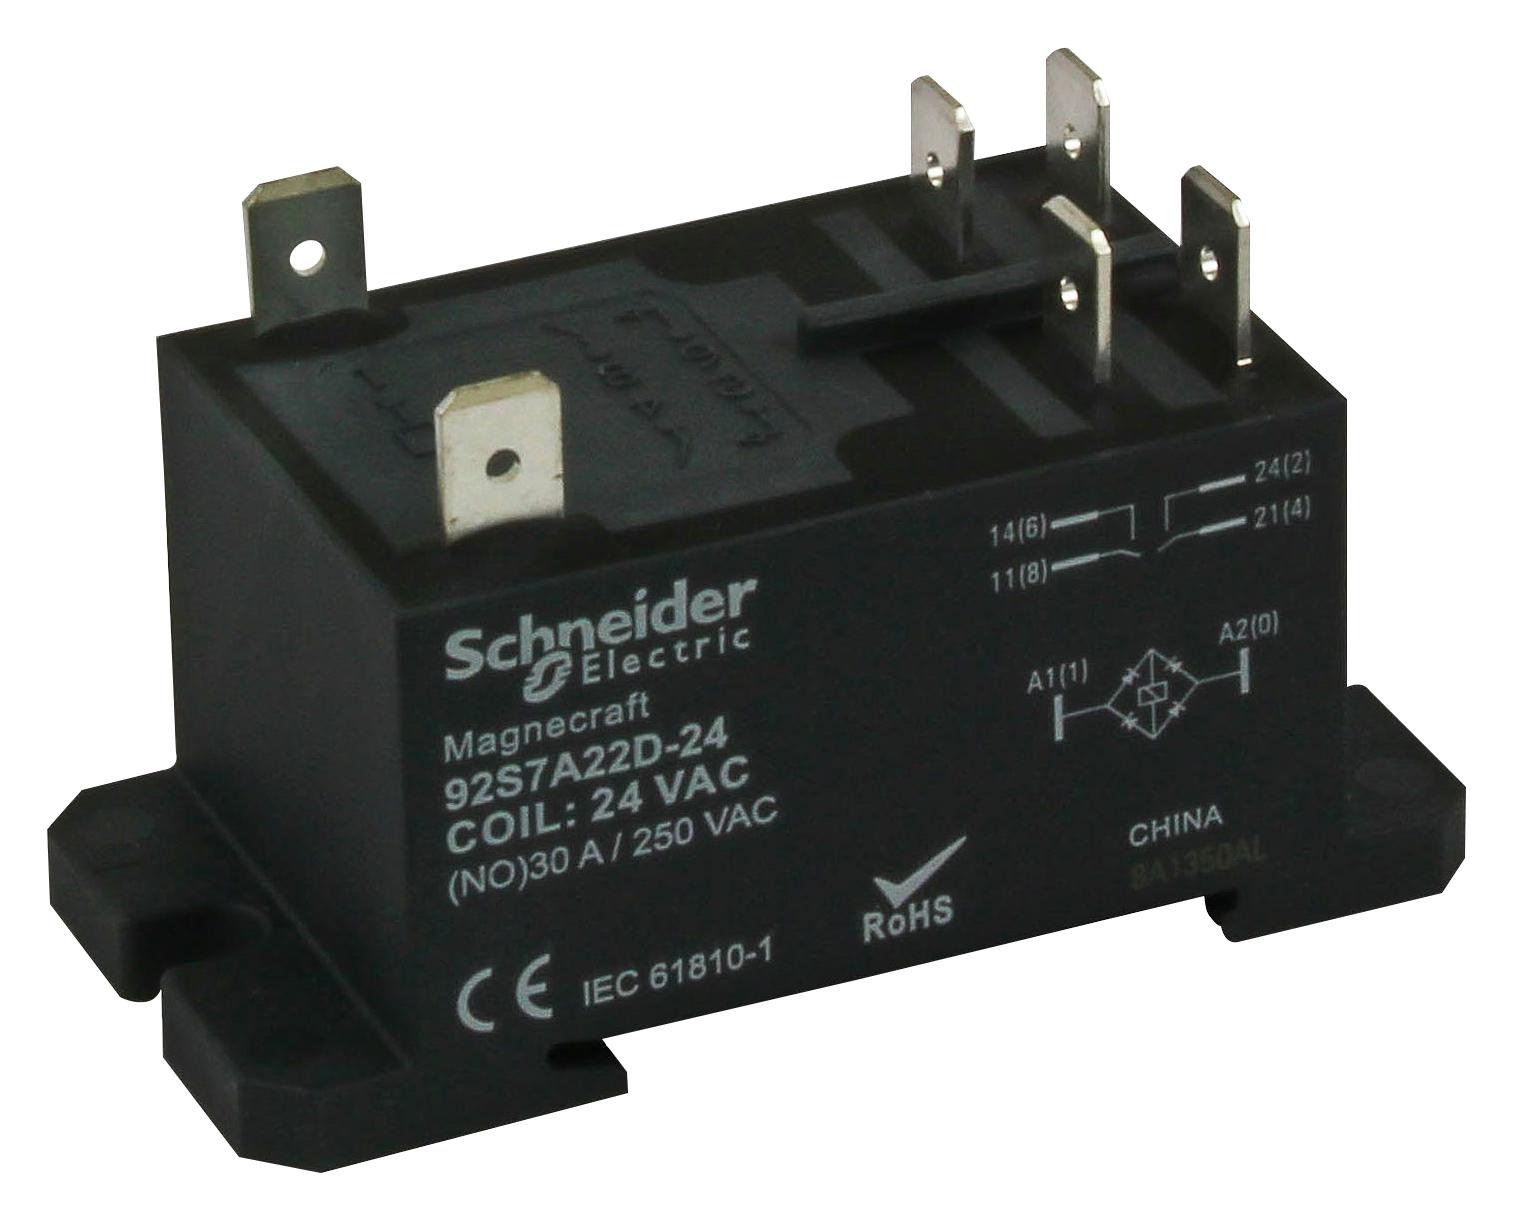 img 92S7A22D24_SCHNEIDER-ELECTRIC-LEGACY-RELAY.jpg